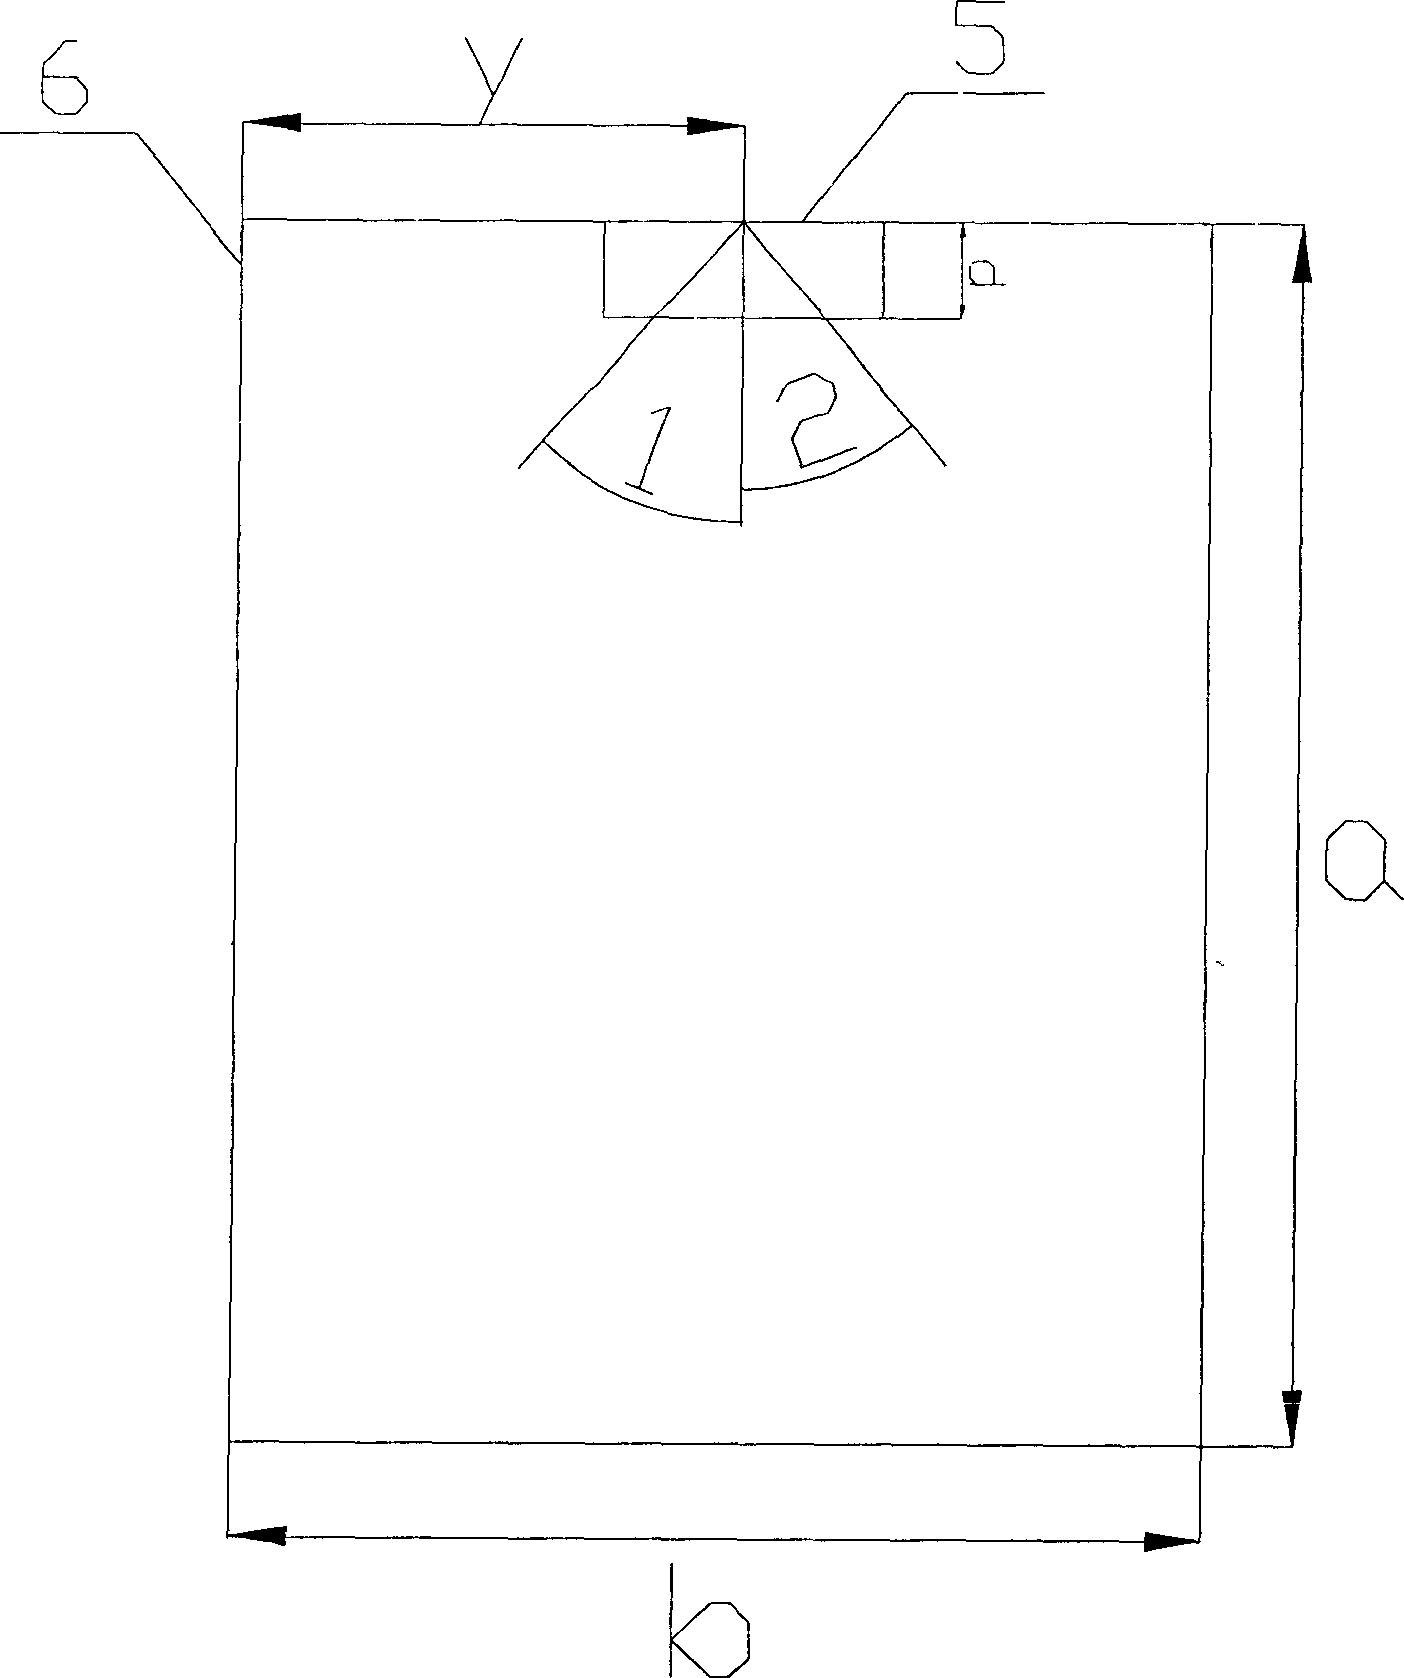 Individual blowing-in angle calculating method of air conditioner